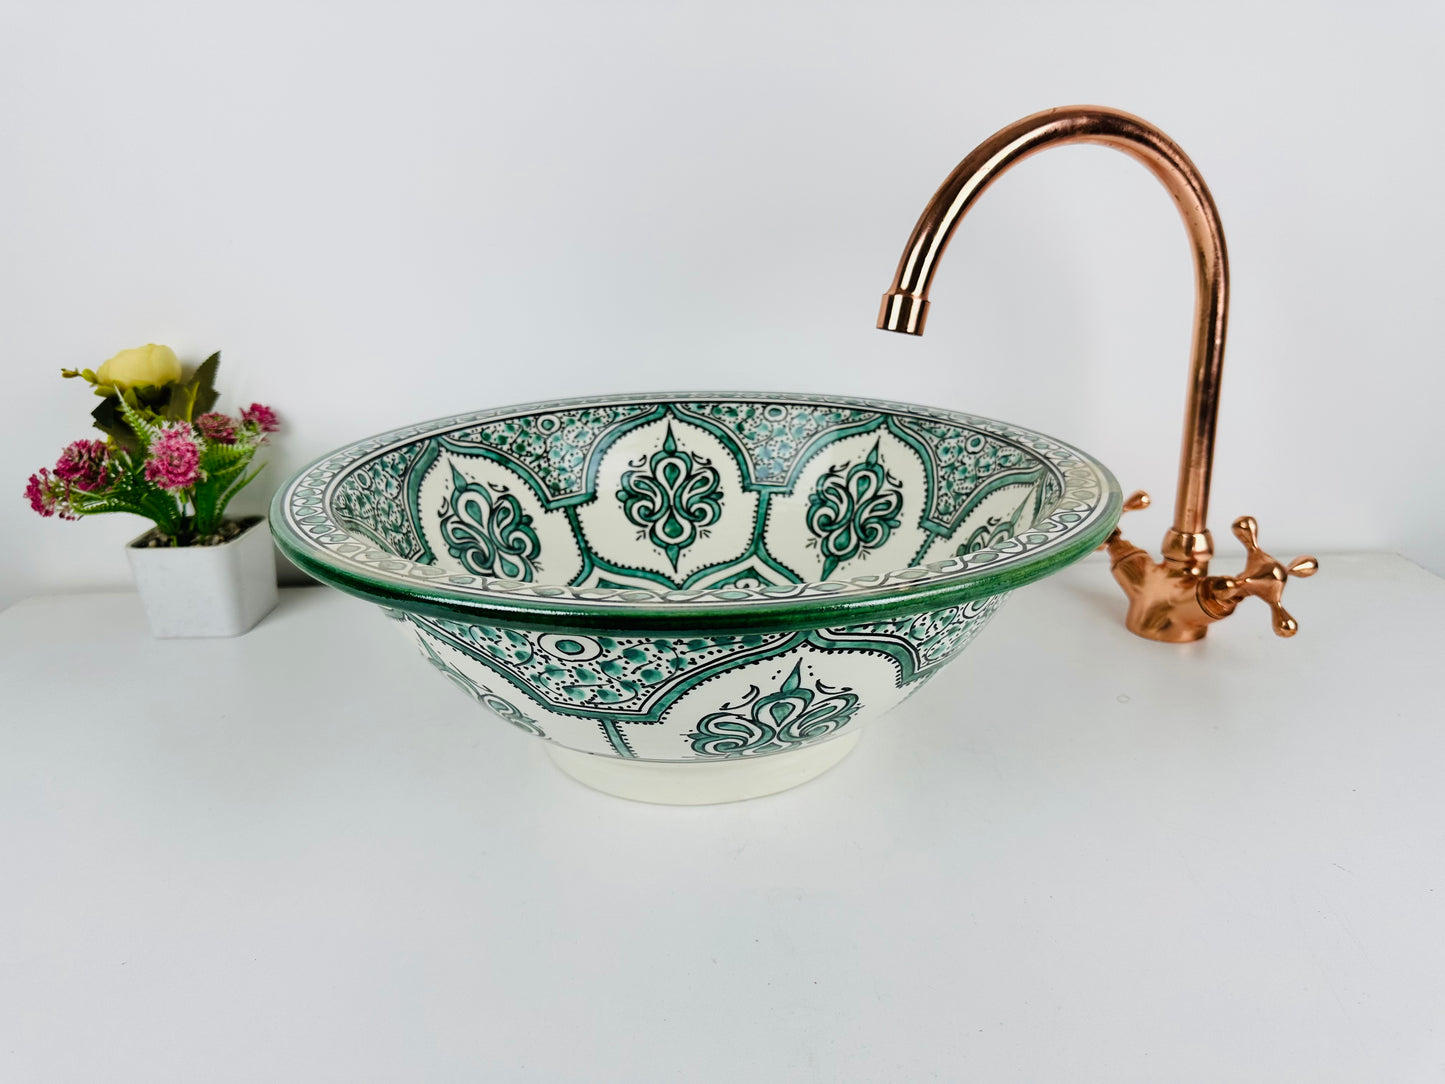 Moroccan Meadow: Handcrafted Ceramic Sink with Traditional Green Moroccan Design